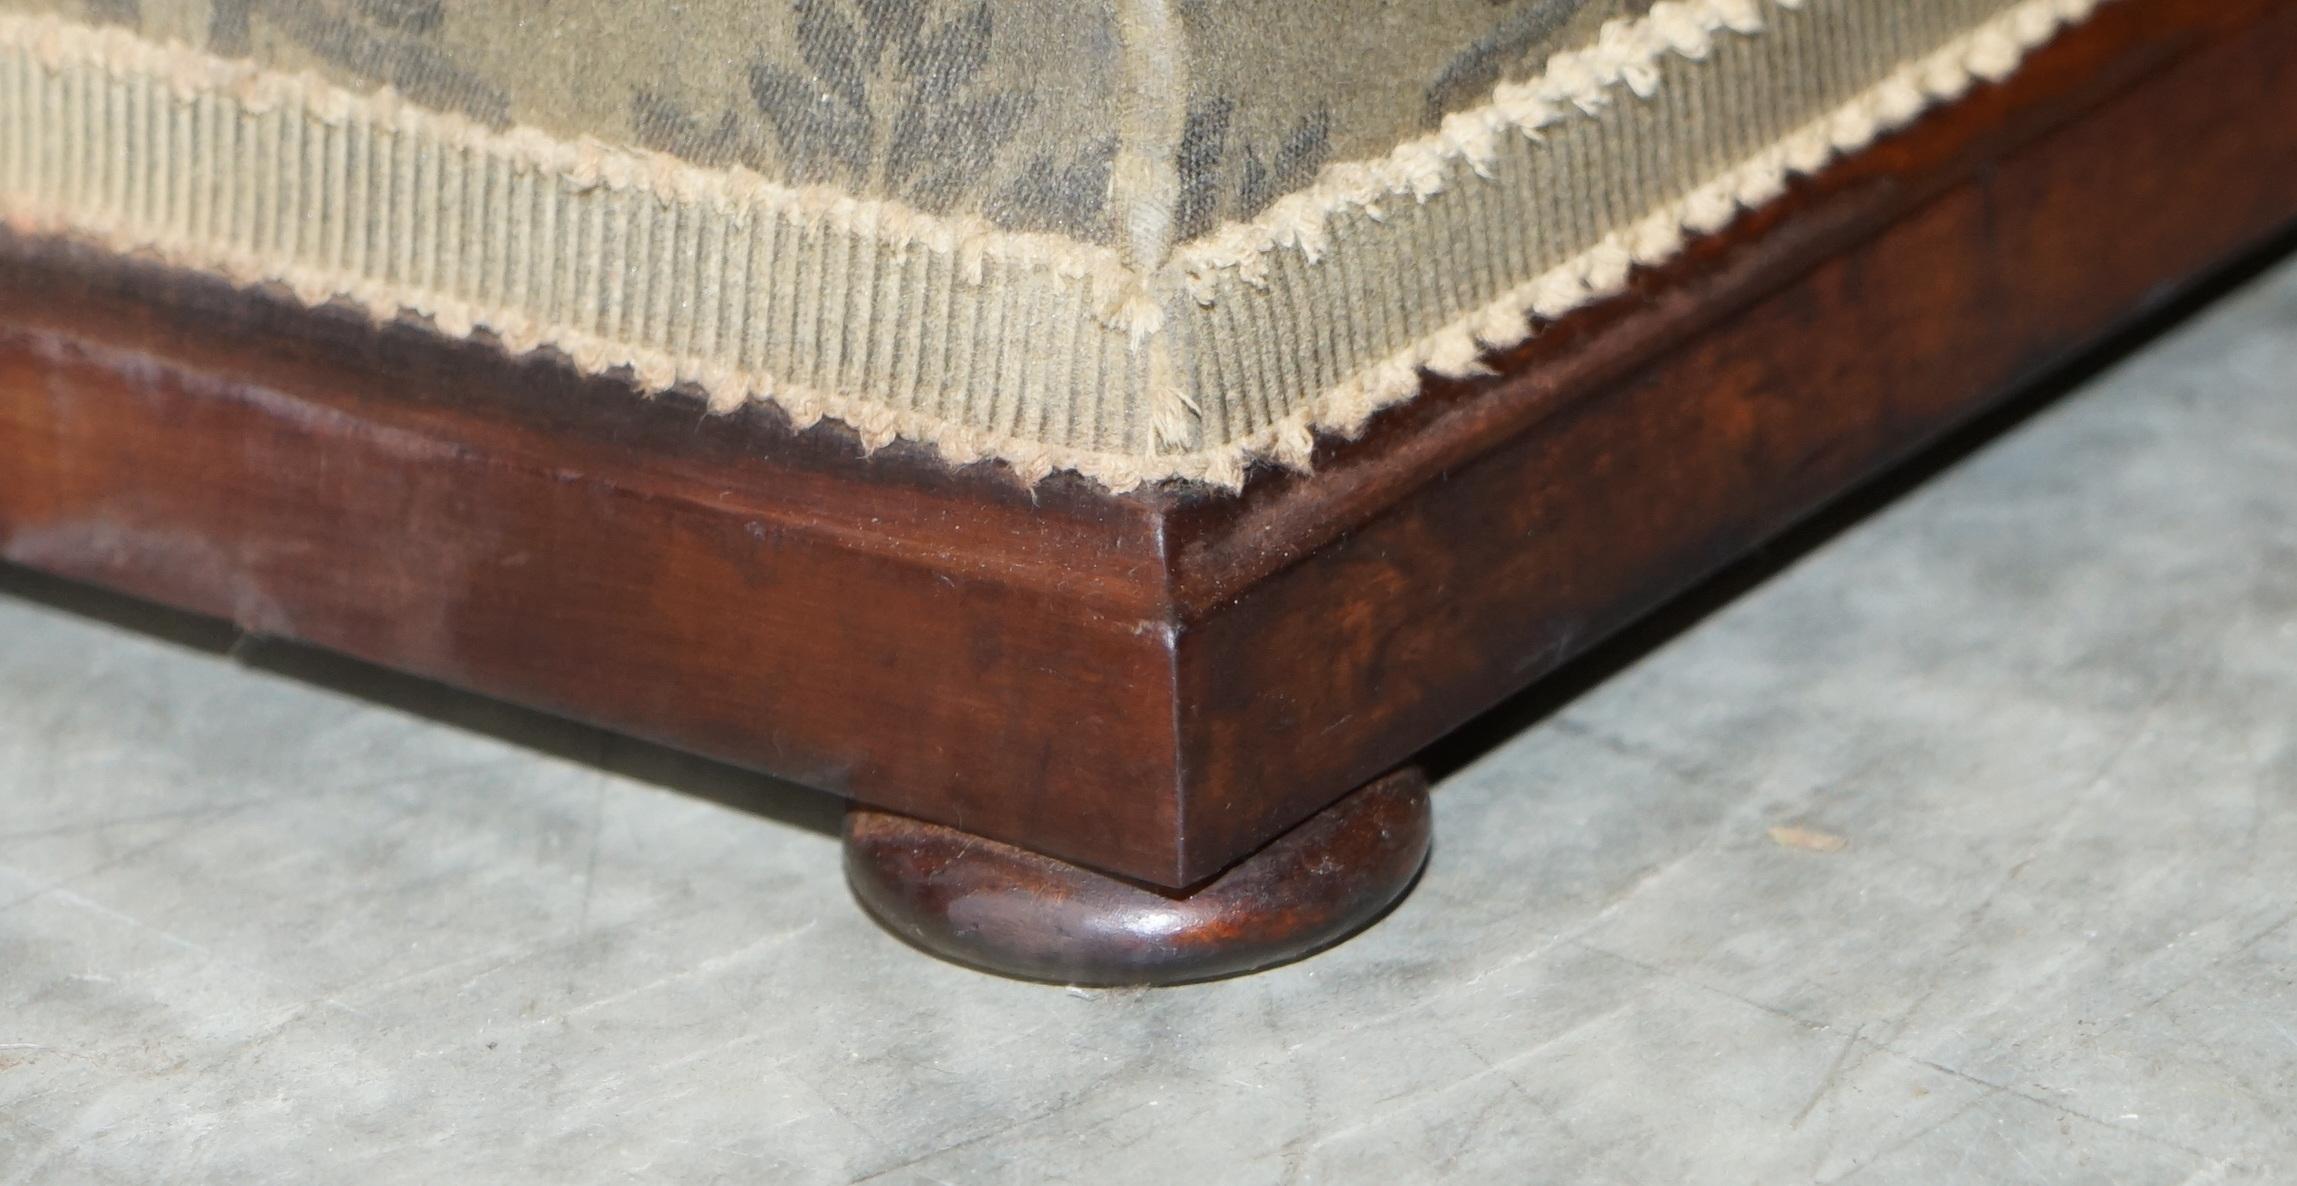 Hand-Crafted Exquisite Upholstered Victorian circa 1860 Ottoman Stool Footstool with Storage For Sale